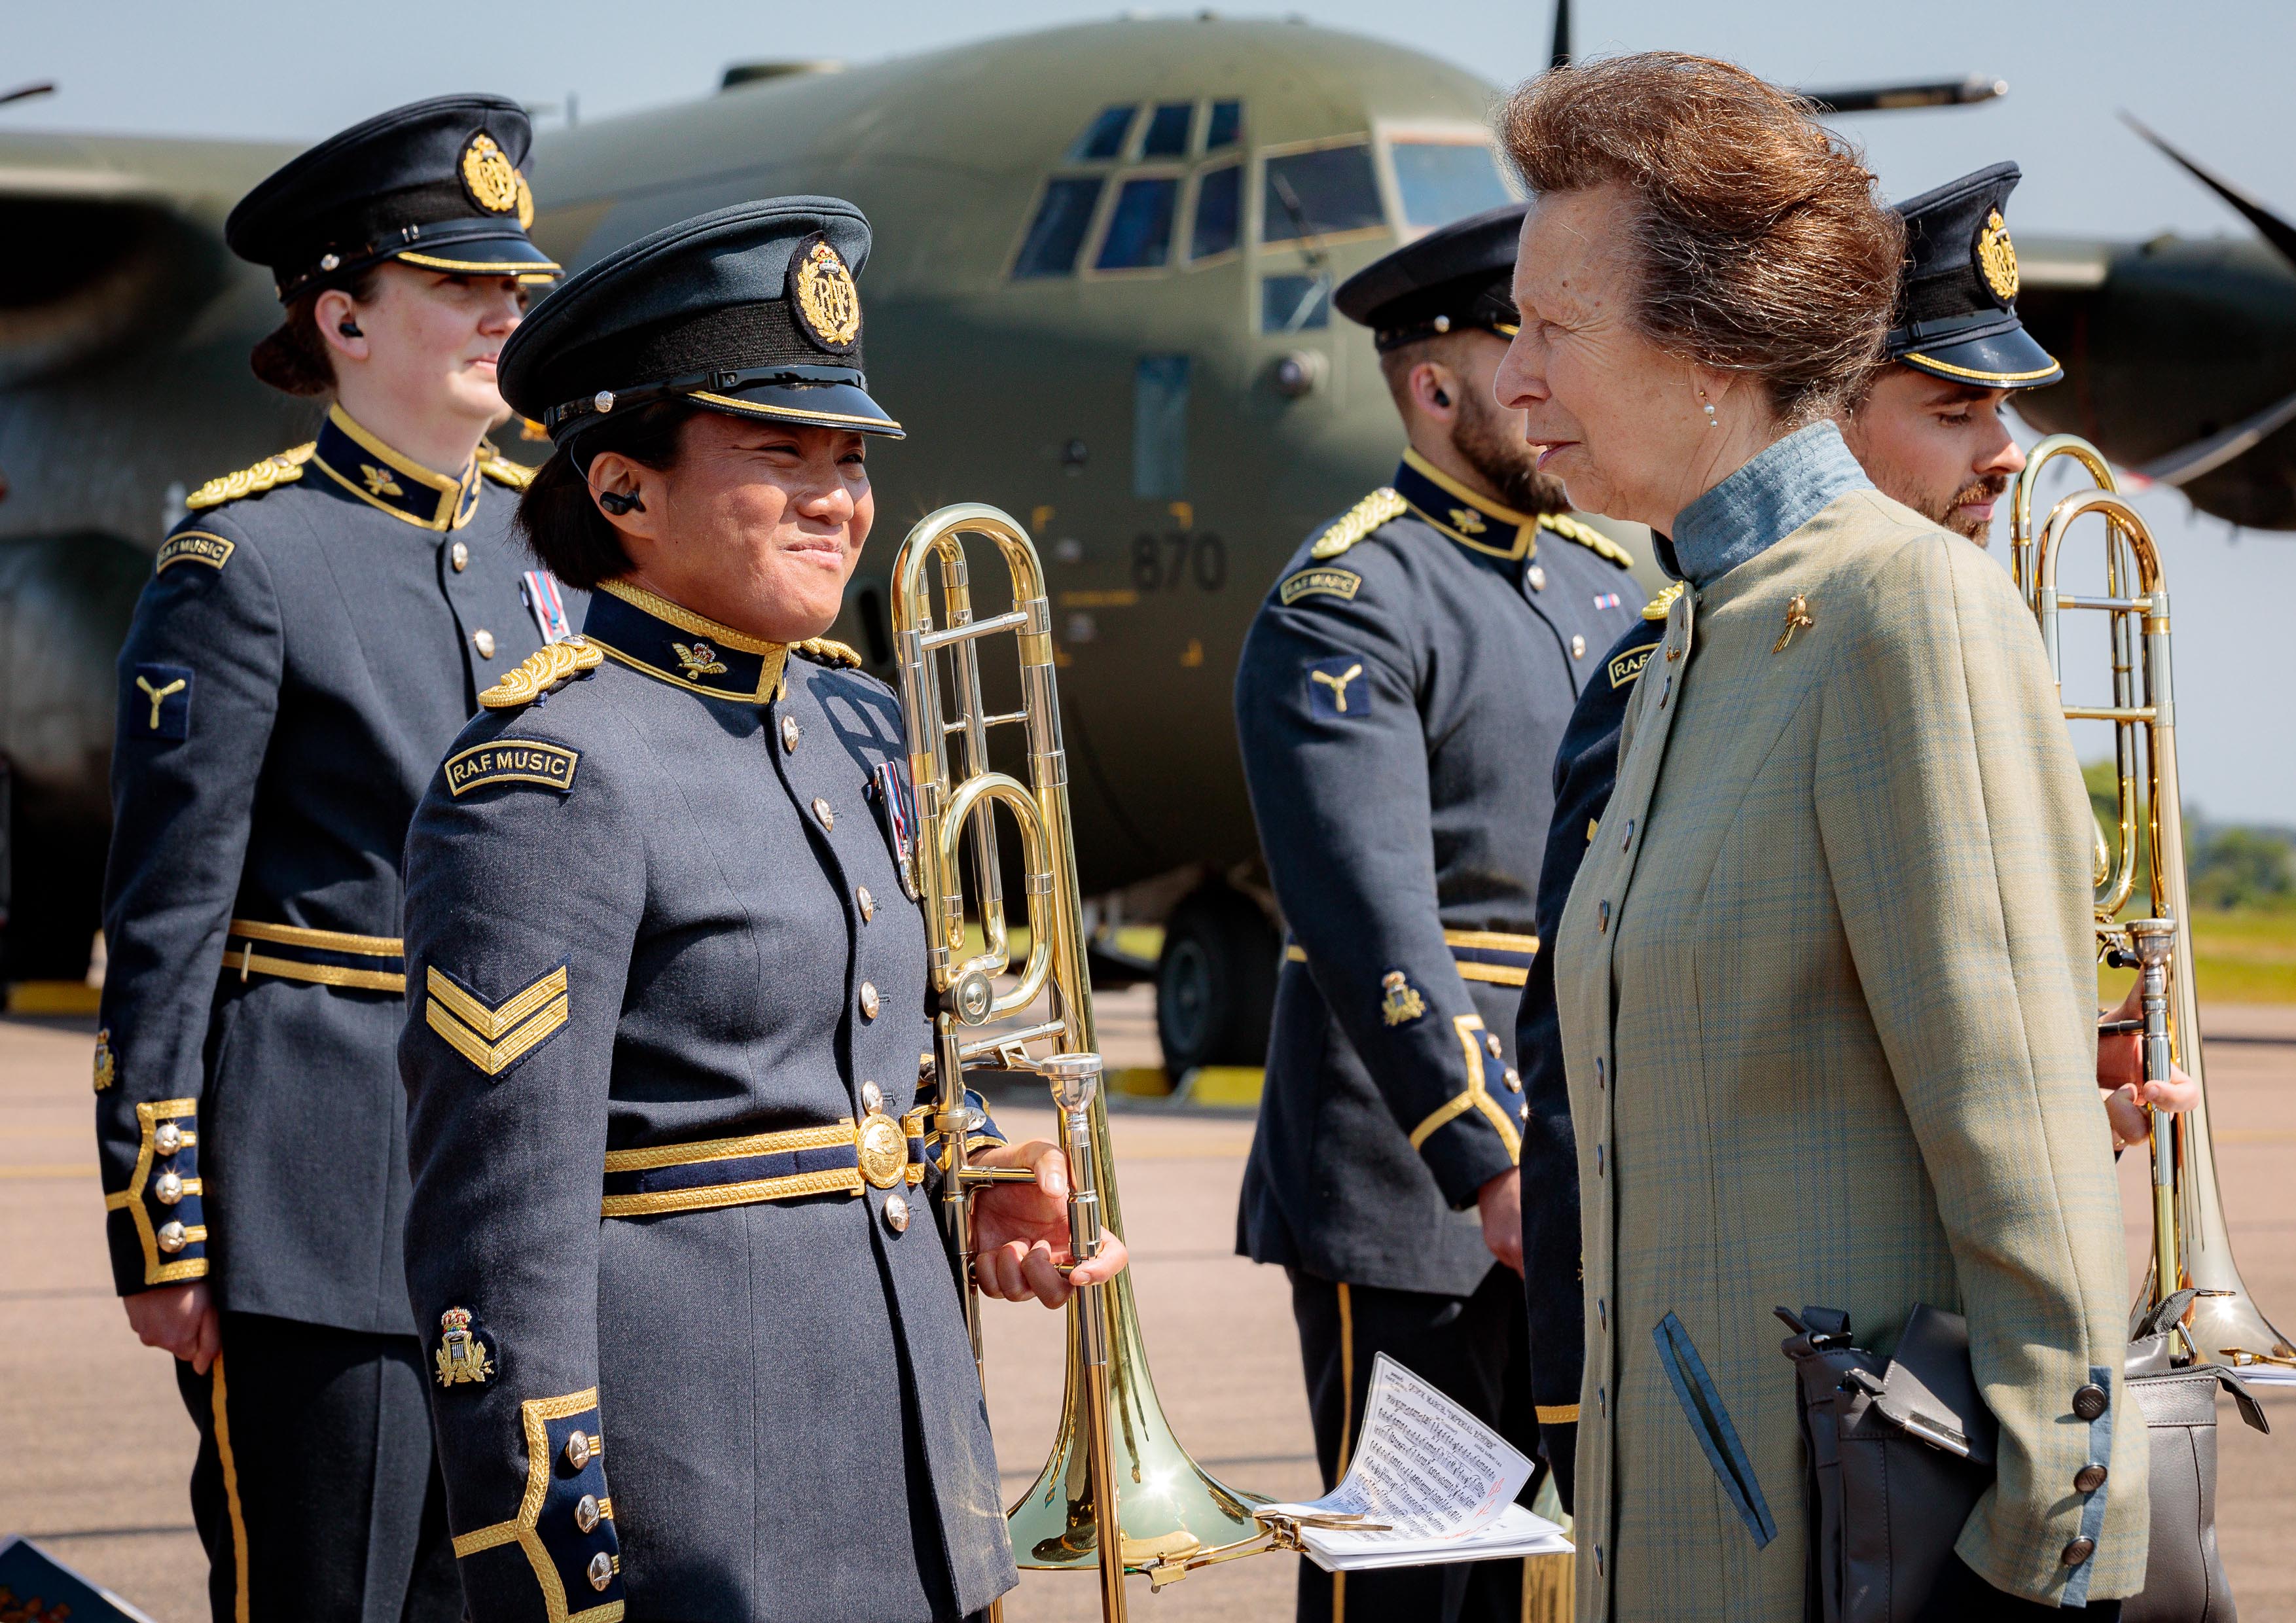 Today, Her Royal Highness, The Princess Royal, attended the stand down parade of Number 47 Squadron and the retirement of the C-130 Hercules.